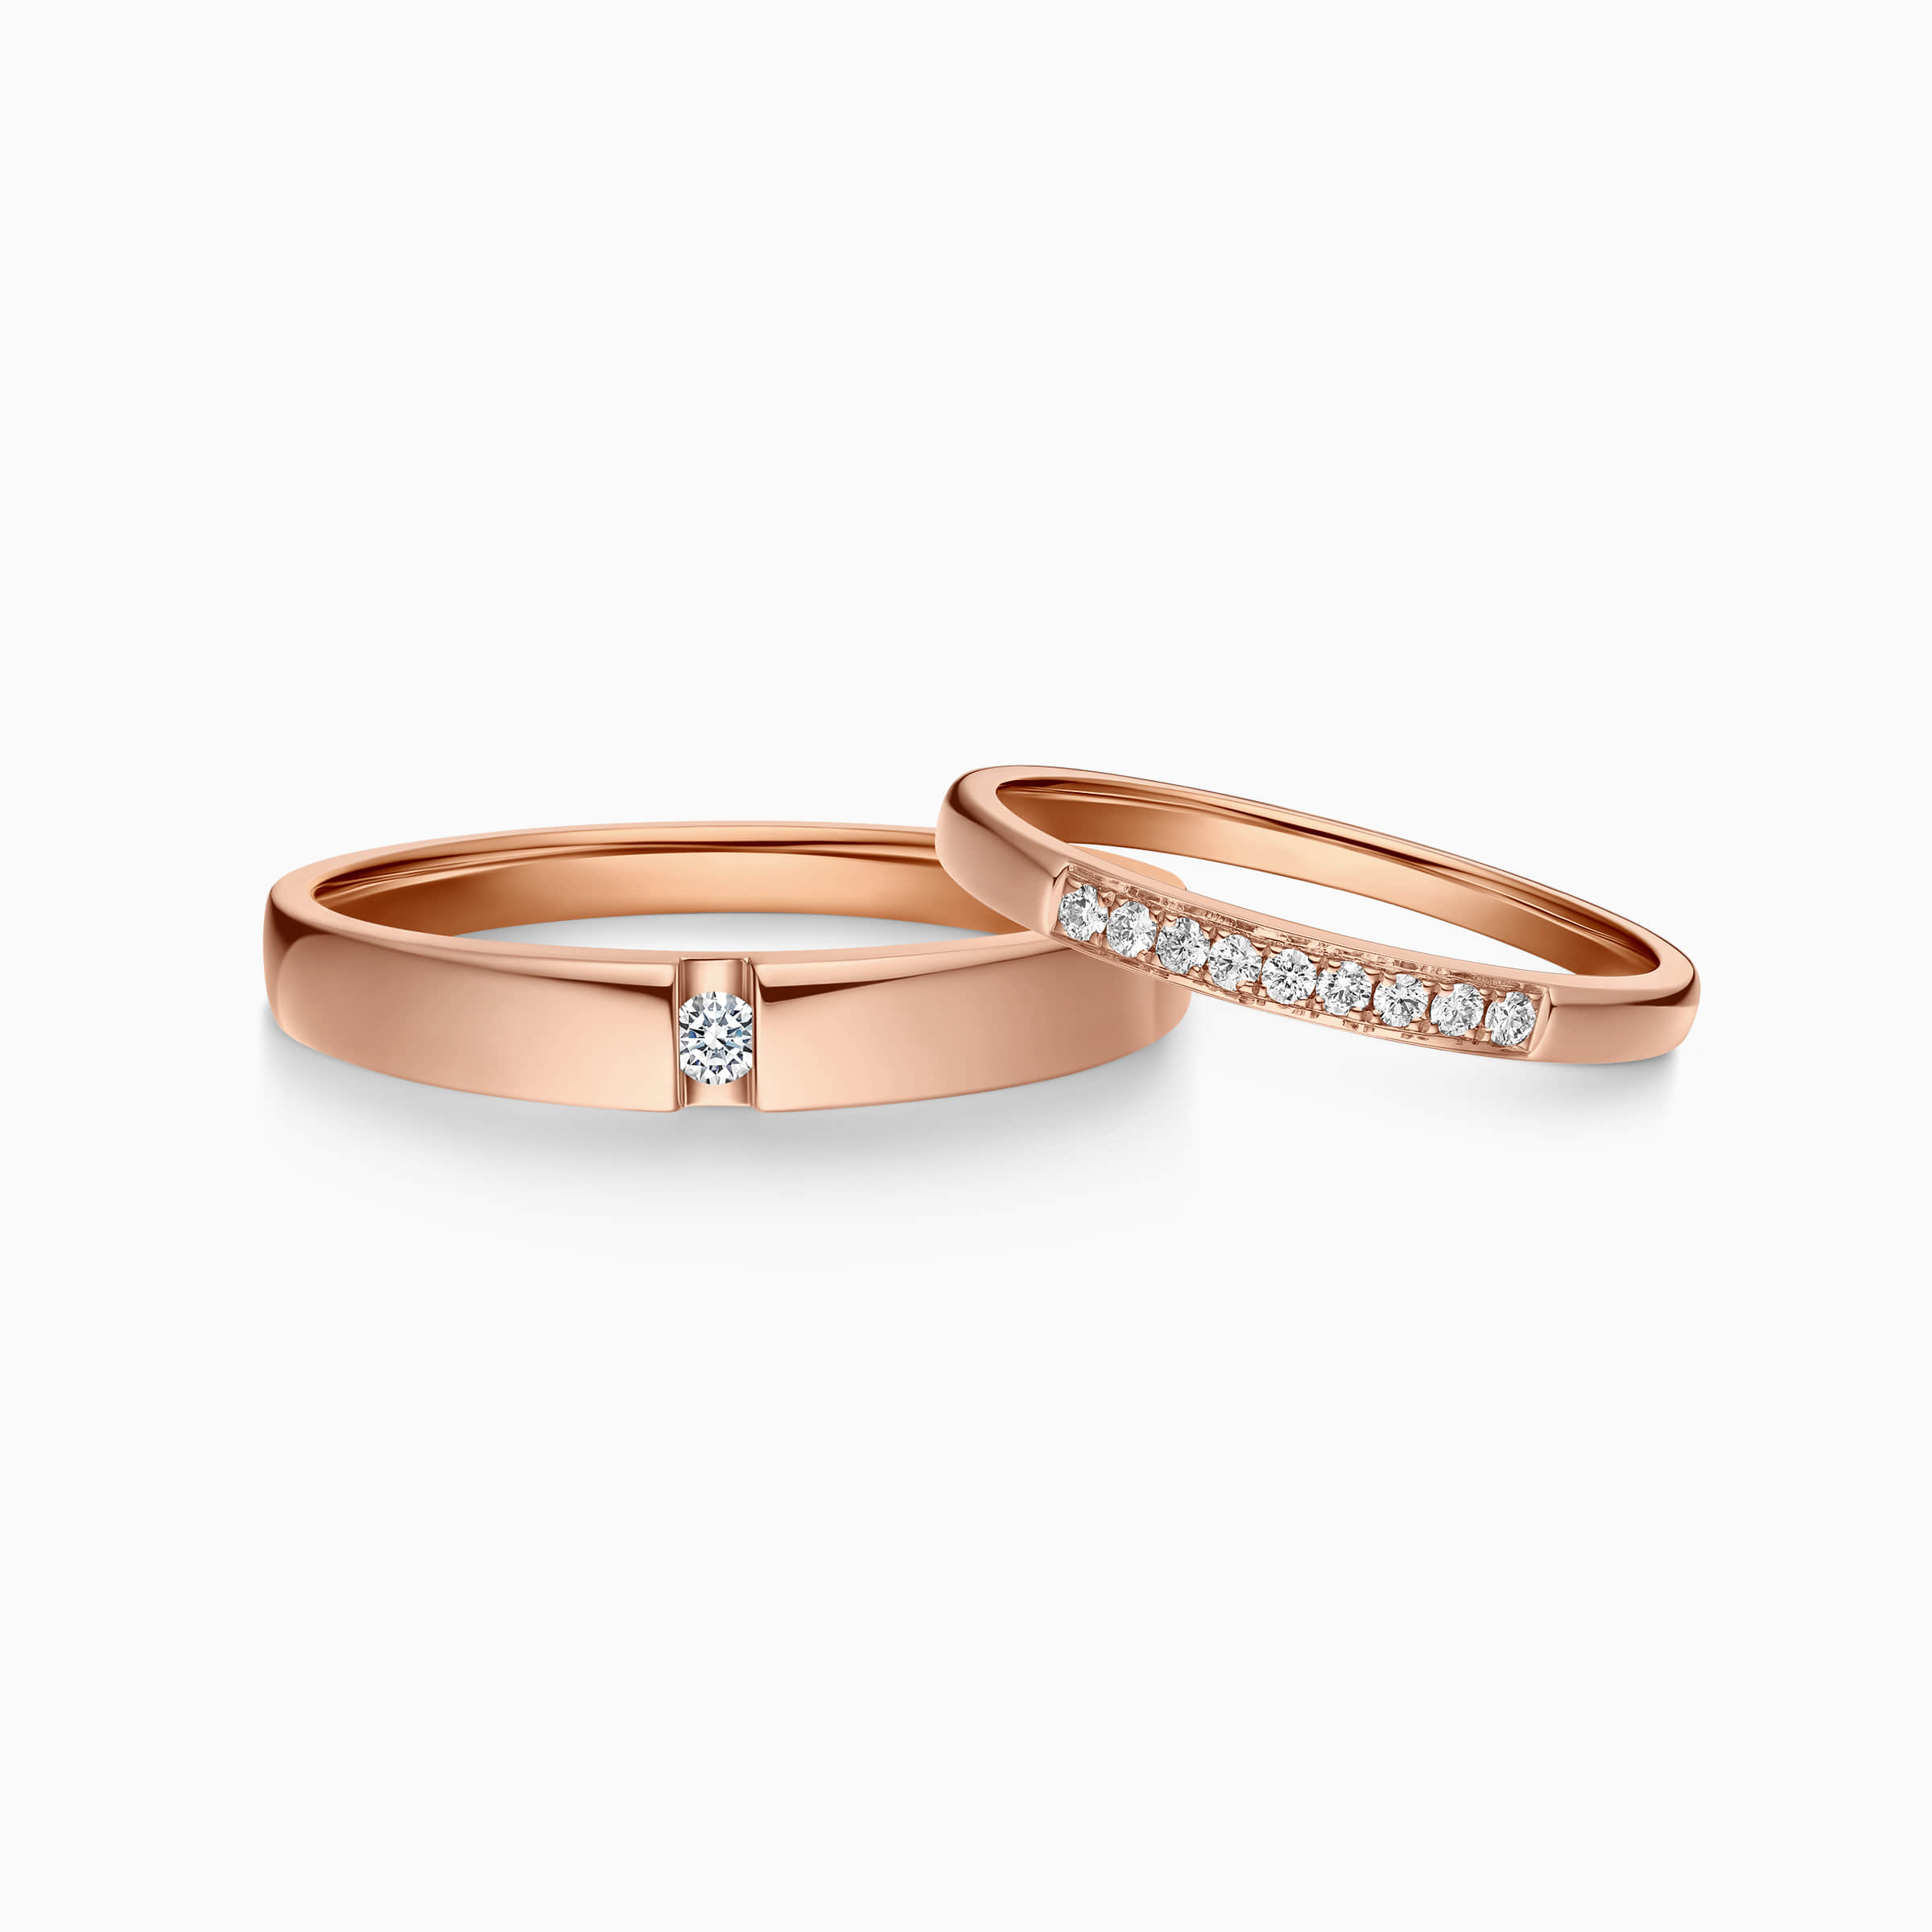 Top 10 Promise Ring Styles for Her